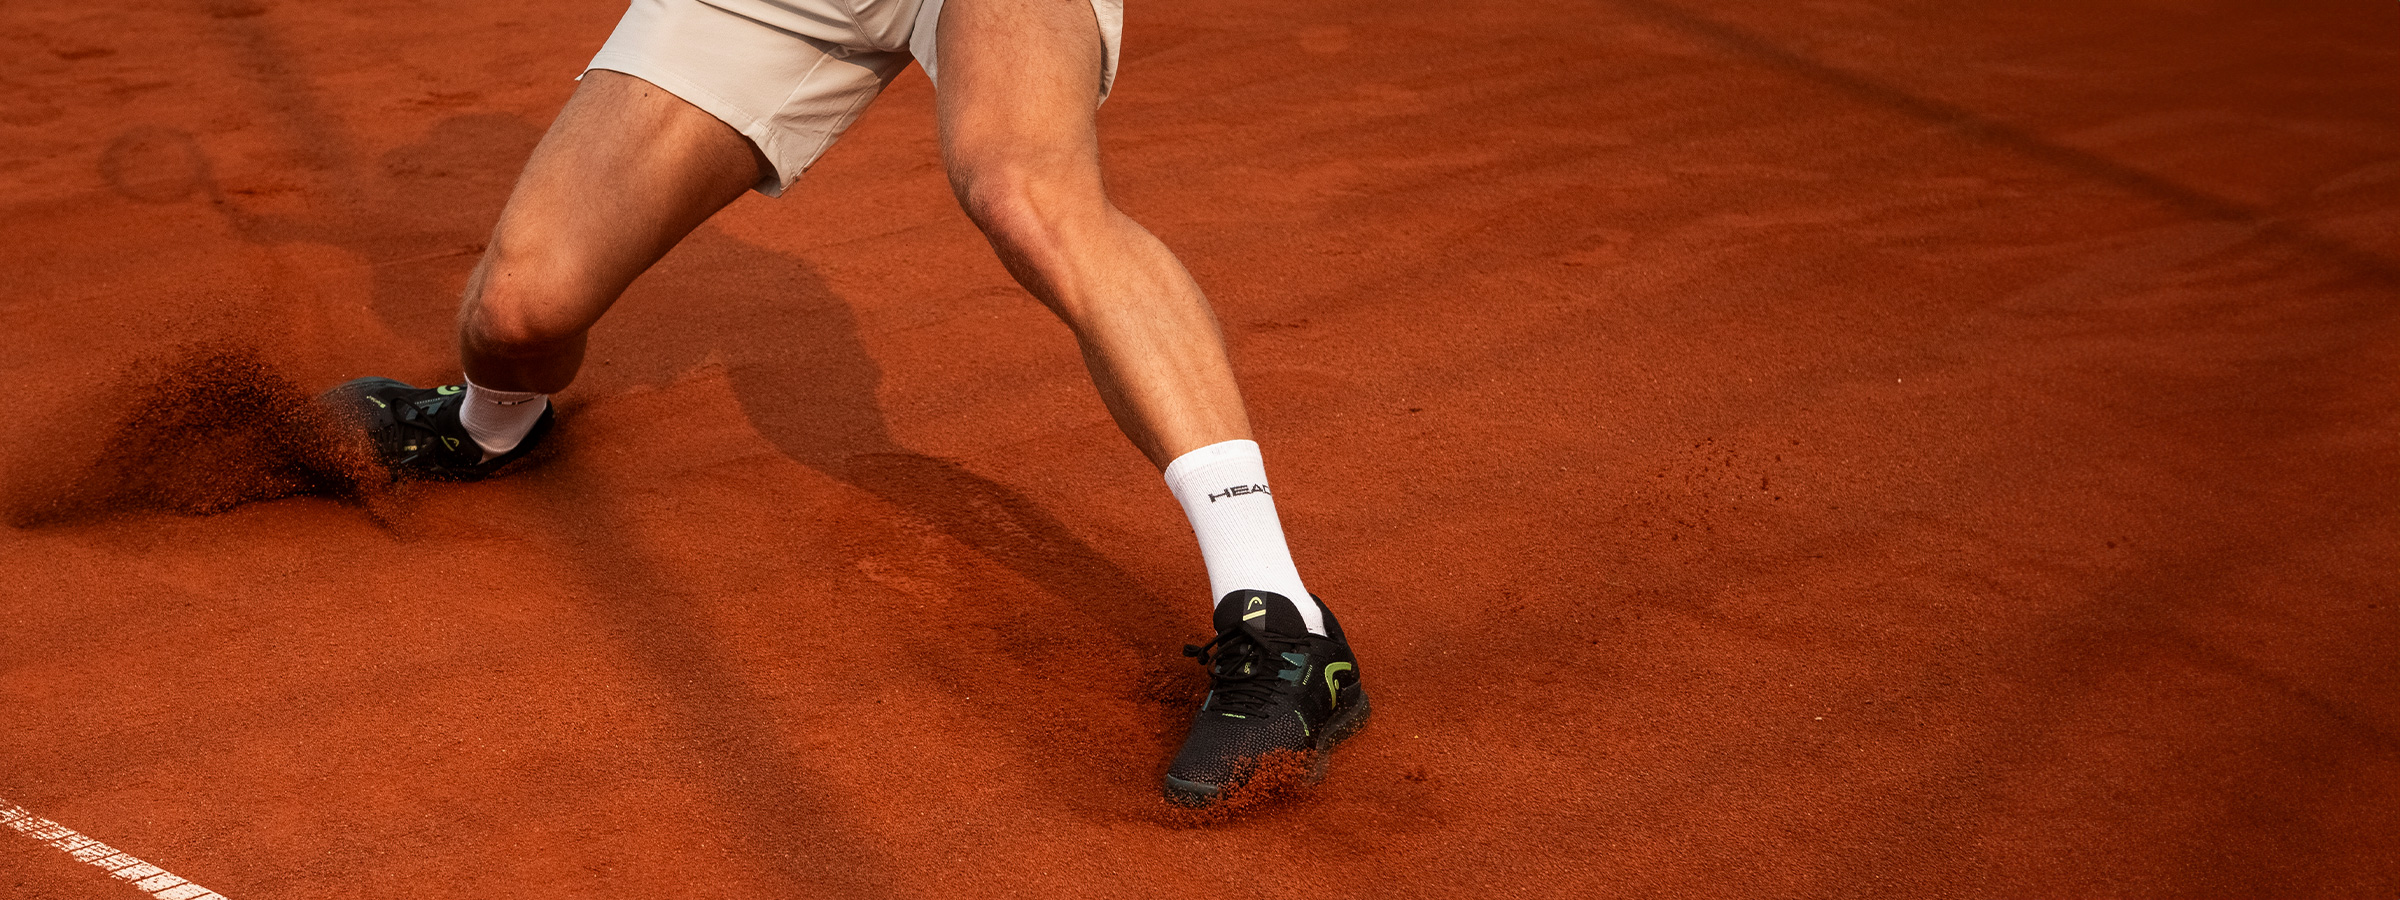 The best shoes for clay